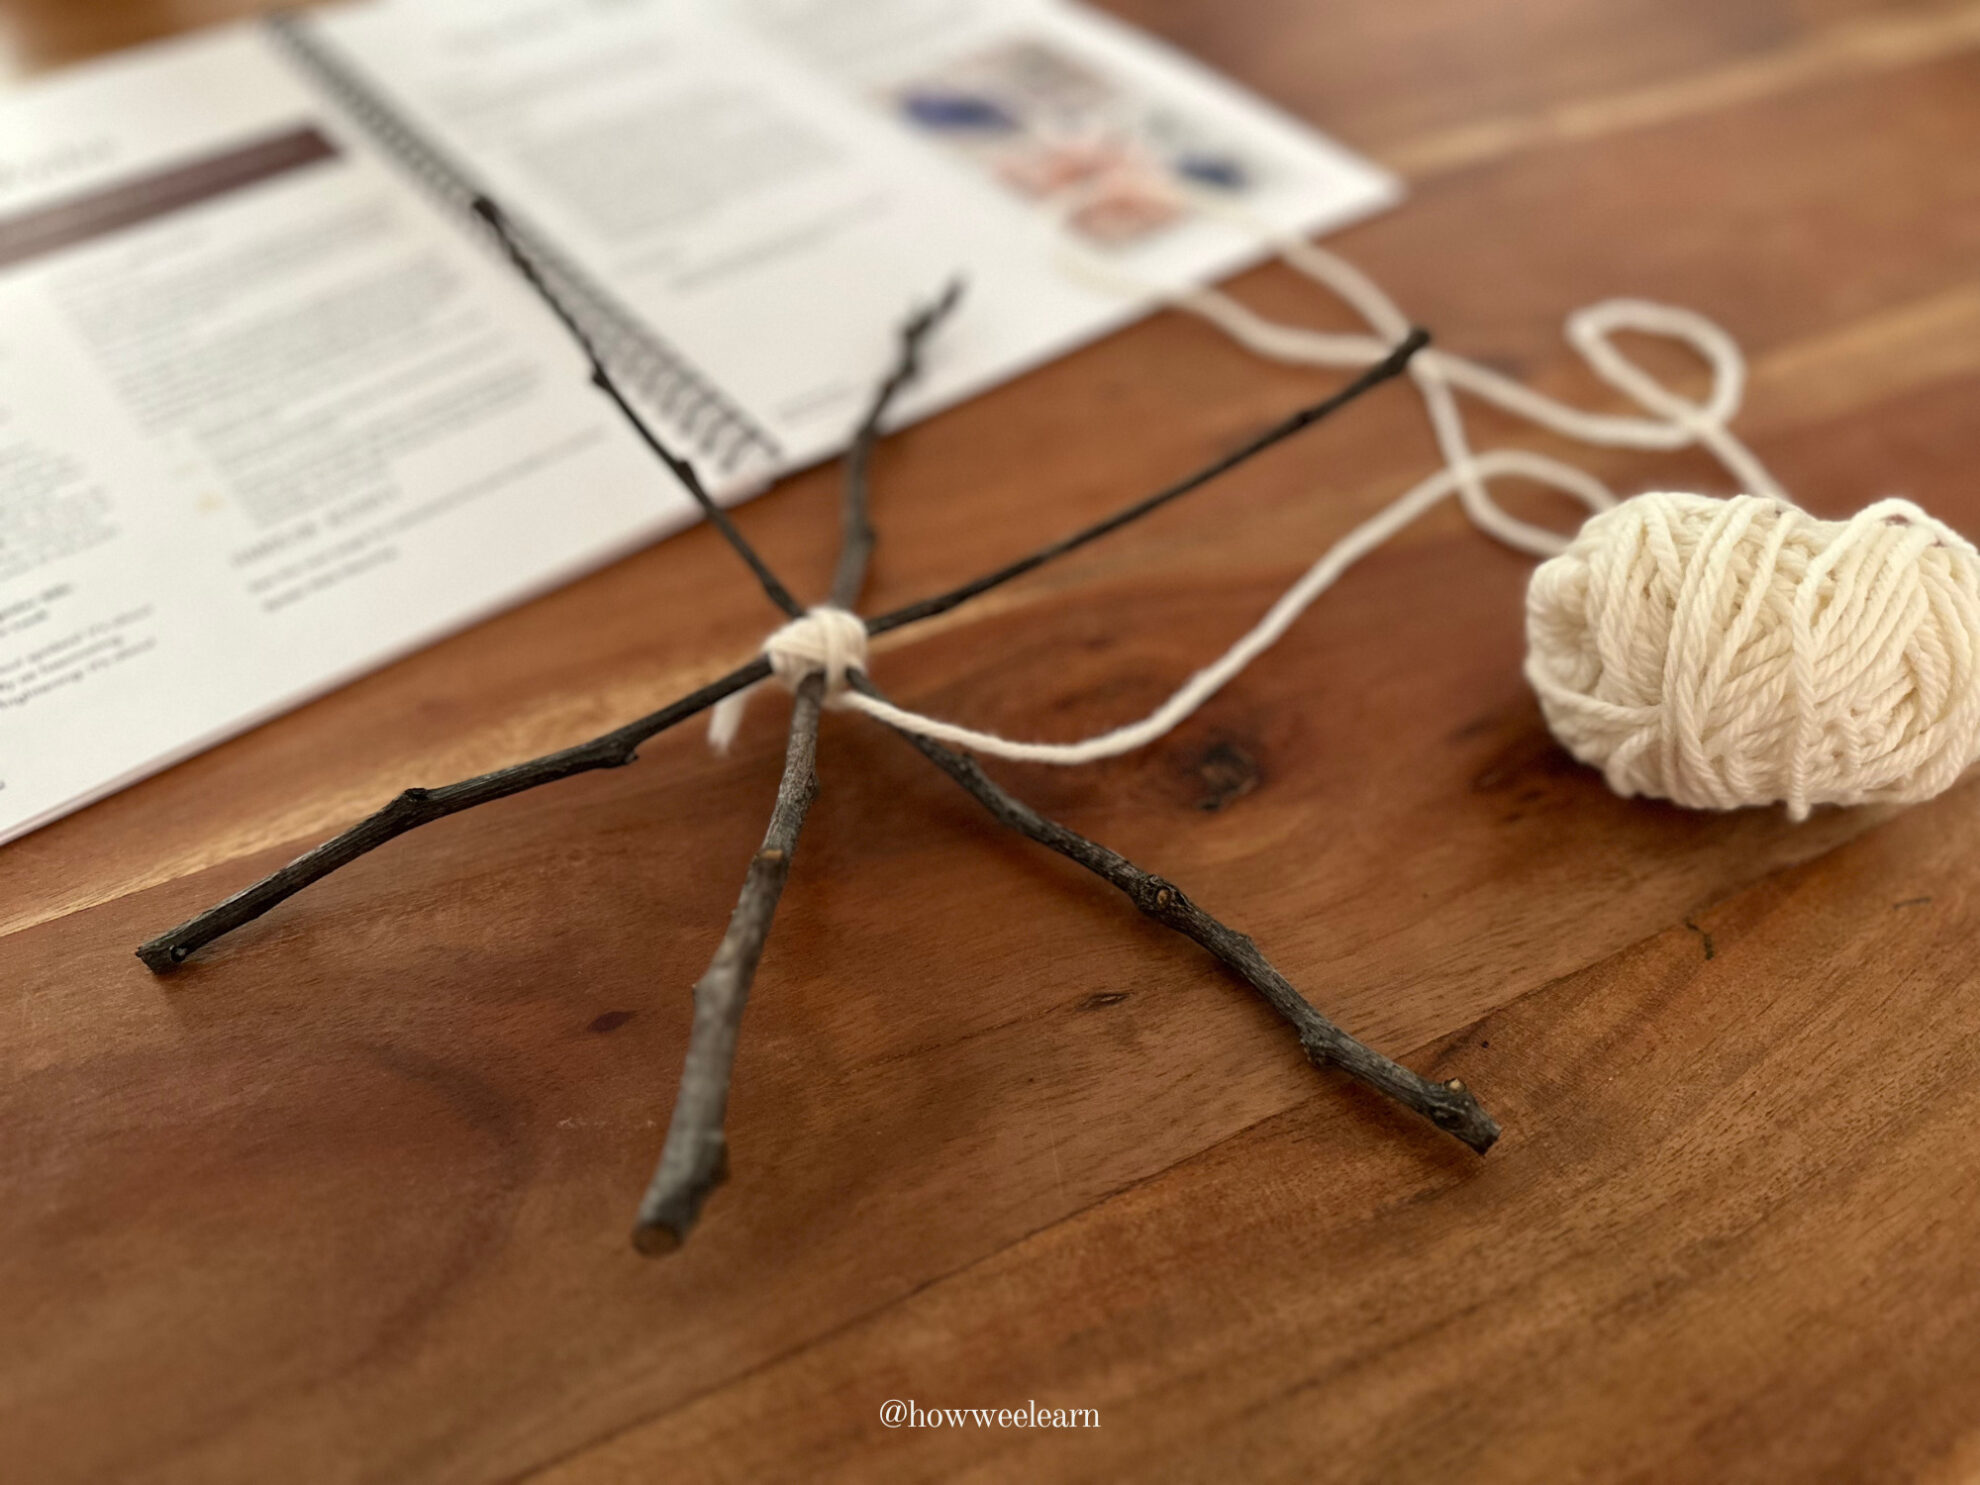 Spider Web Weaving: Secure three sticks in the middle with yarn